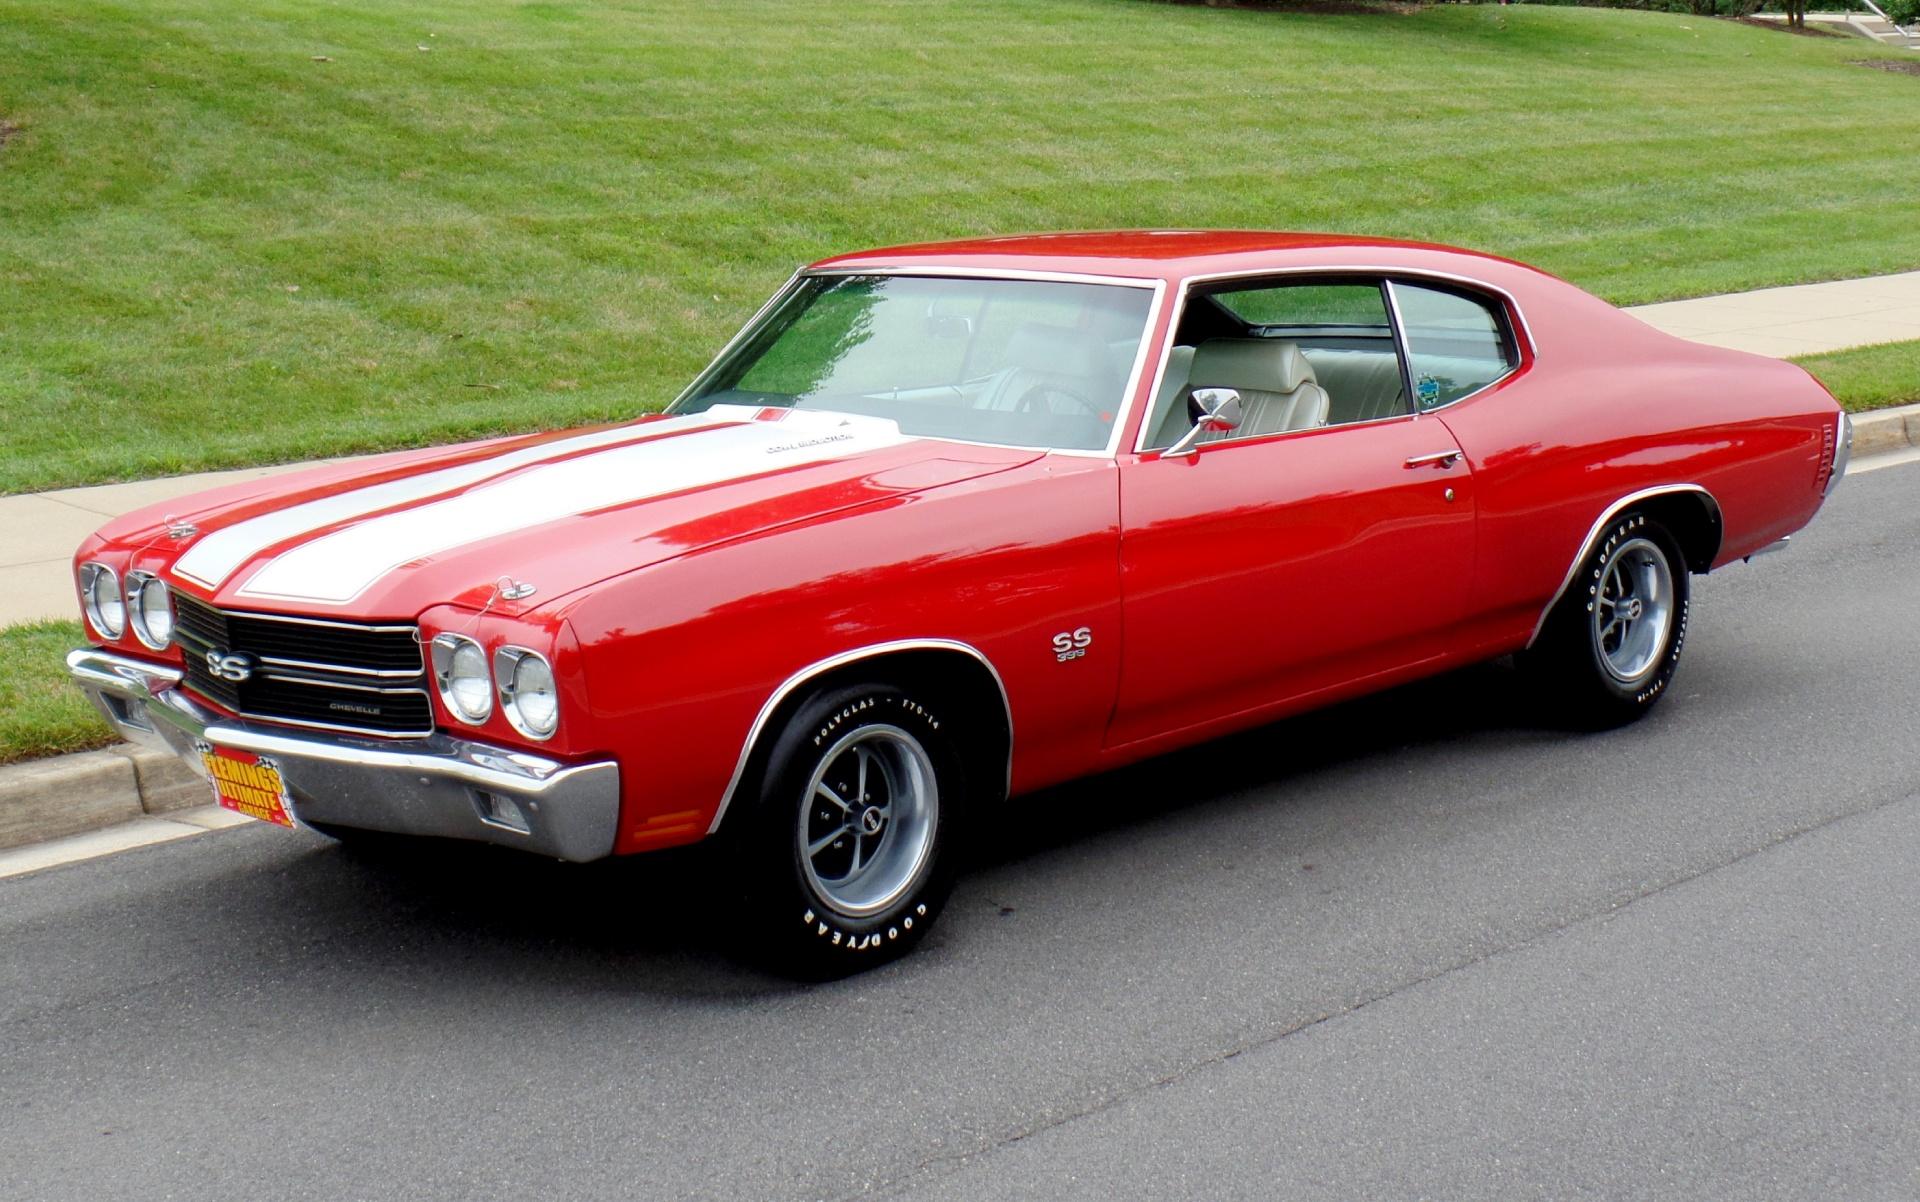 1970 Chevrolet Chevelle SS396 4-Speed, Big Block with Factory A/C.